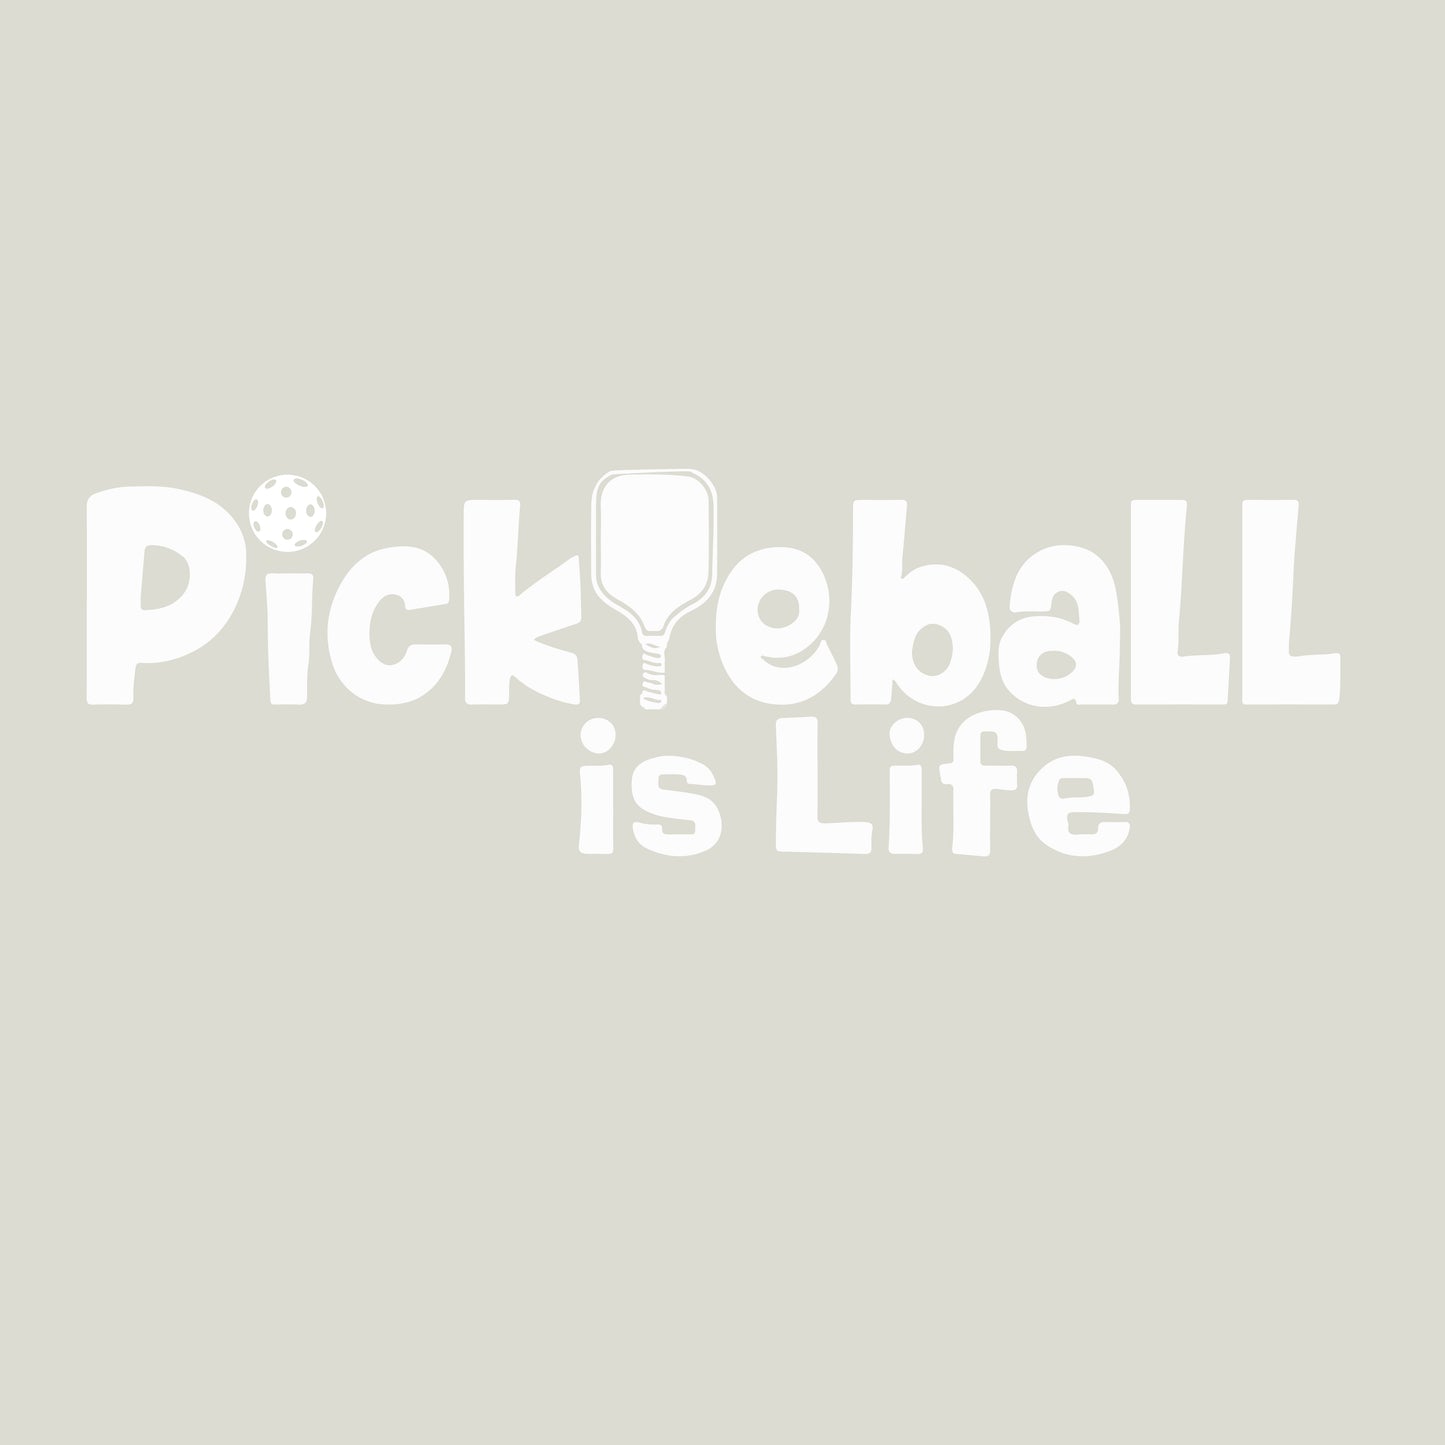 Pickleball is Life | Youth Long Sleeve Athletic Pickleball Shirt | 100% Polyester